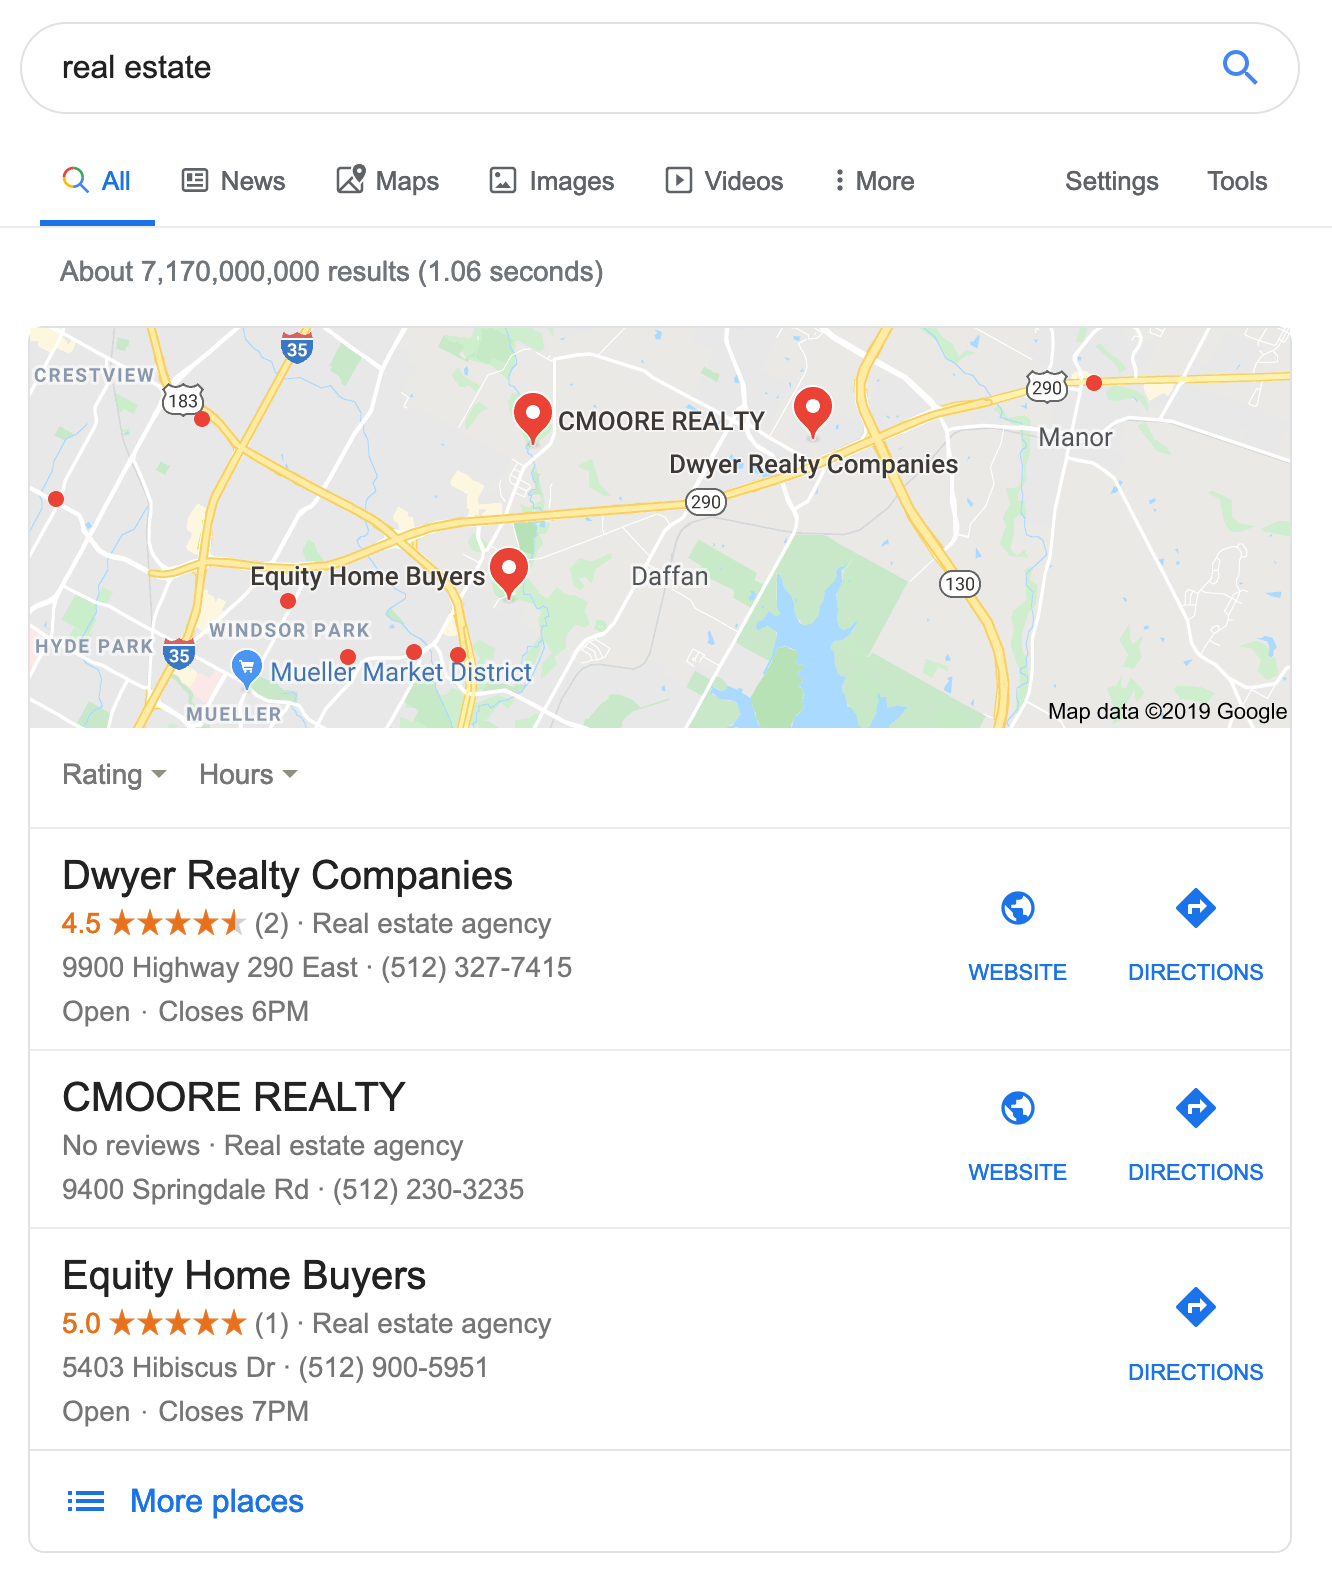 local seo search results for real estate